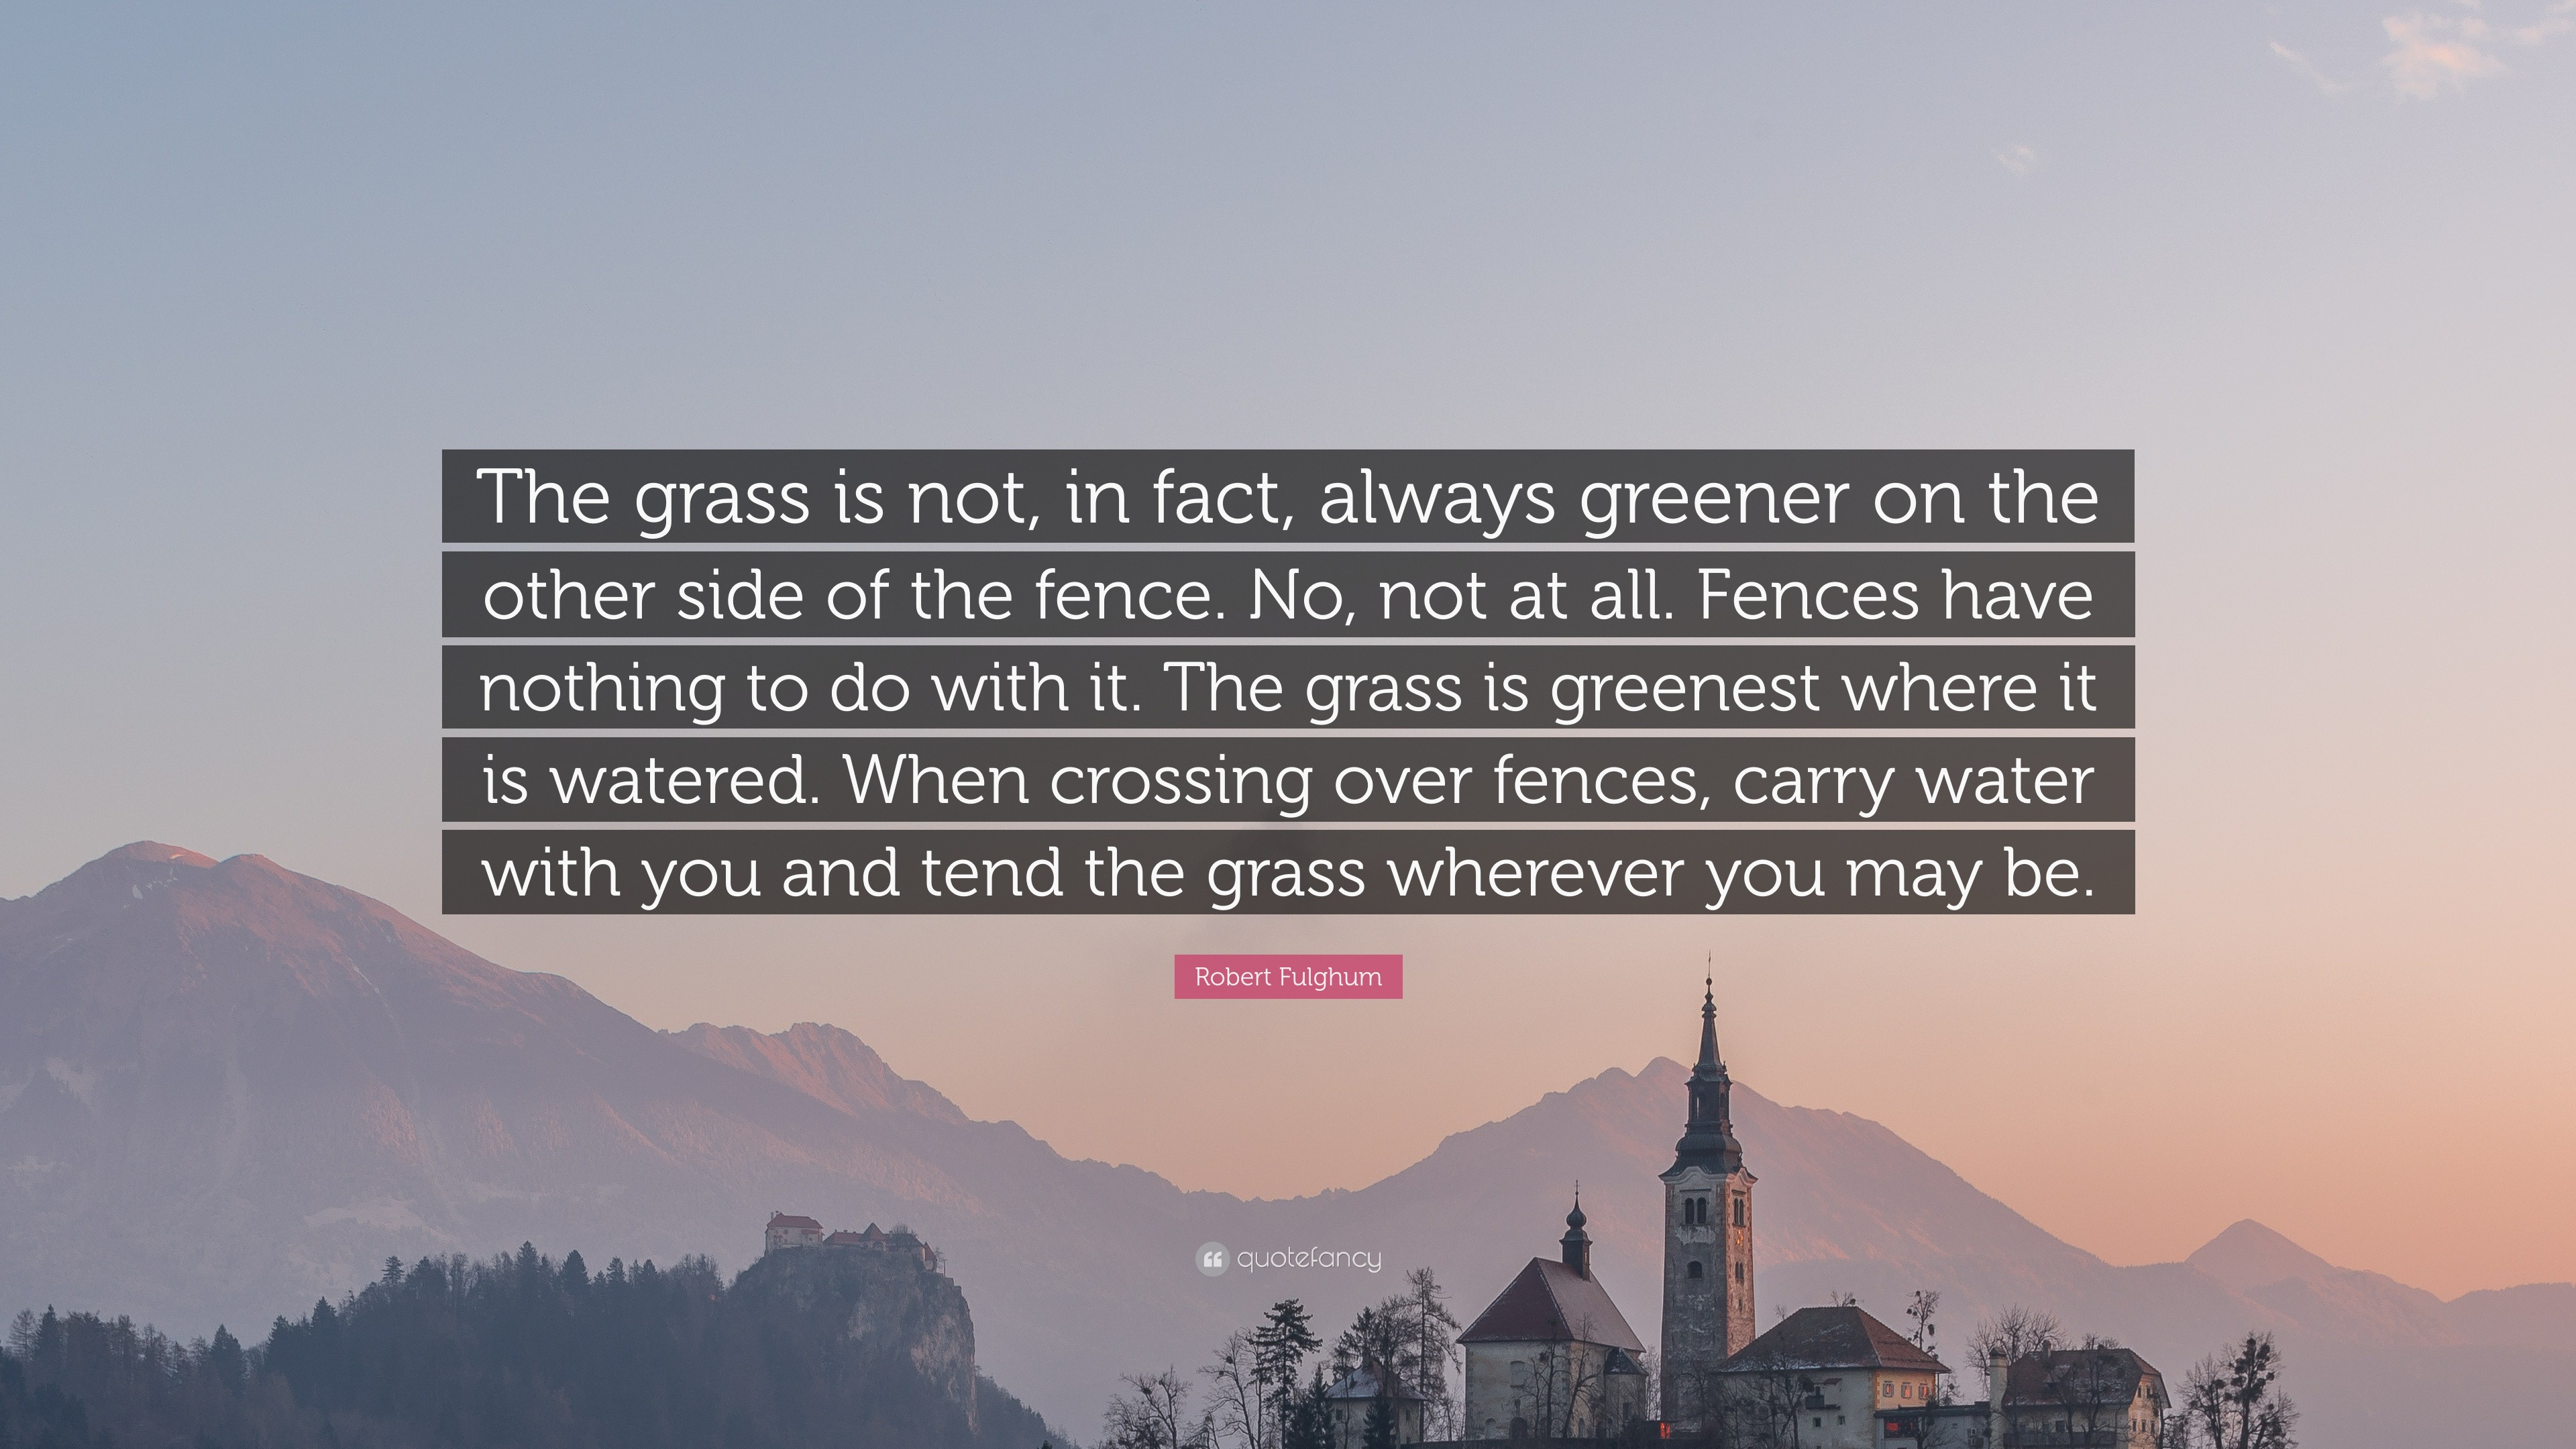 Robert Fulghum Quote: “The grass is not, in fact, always greener on the